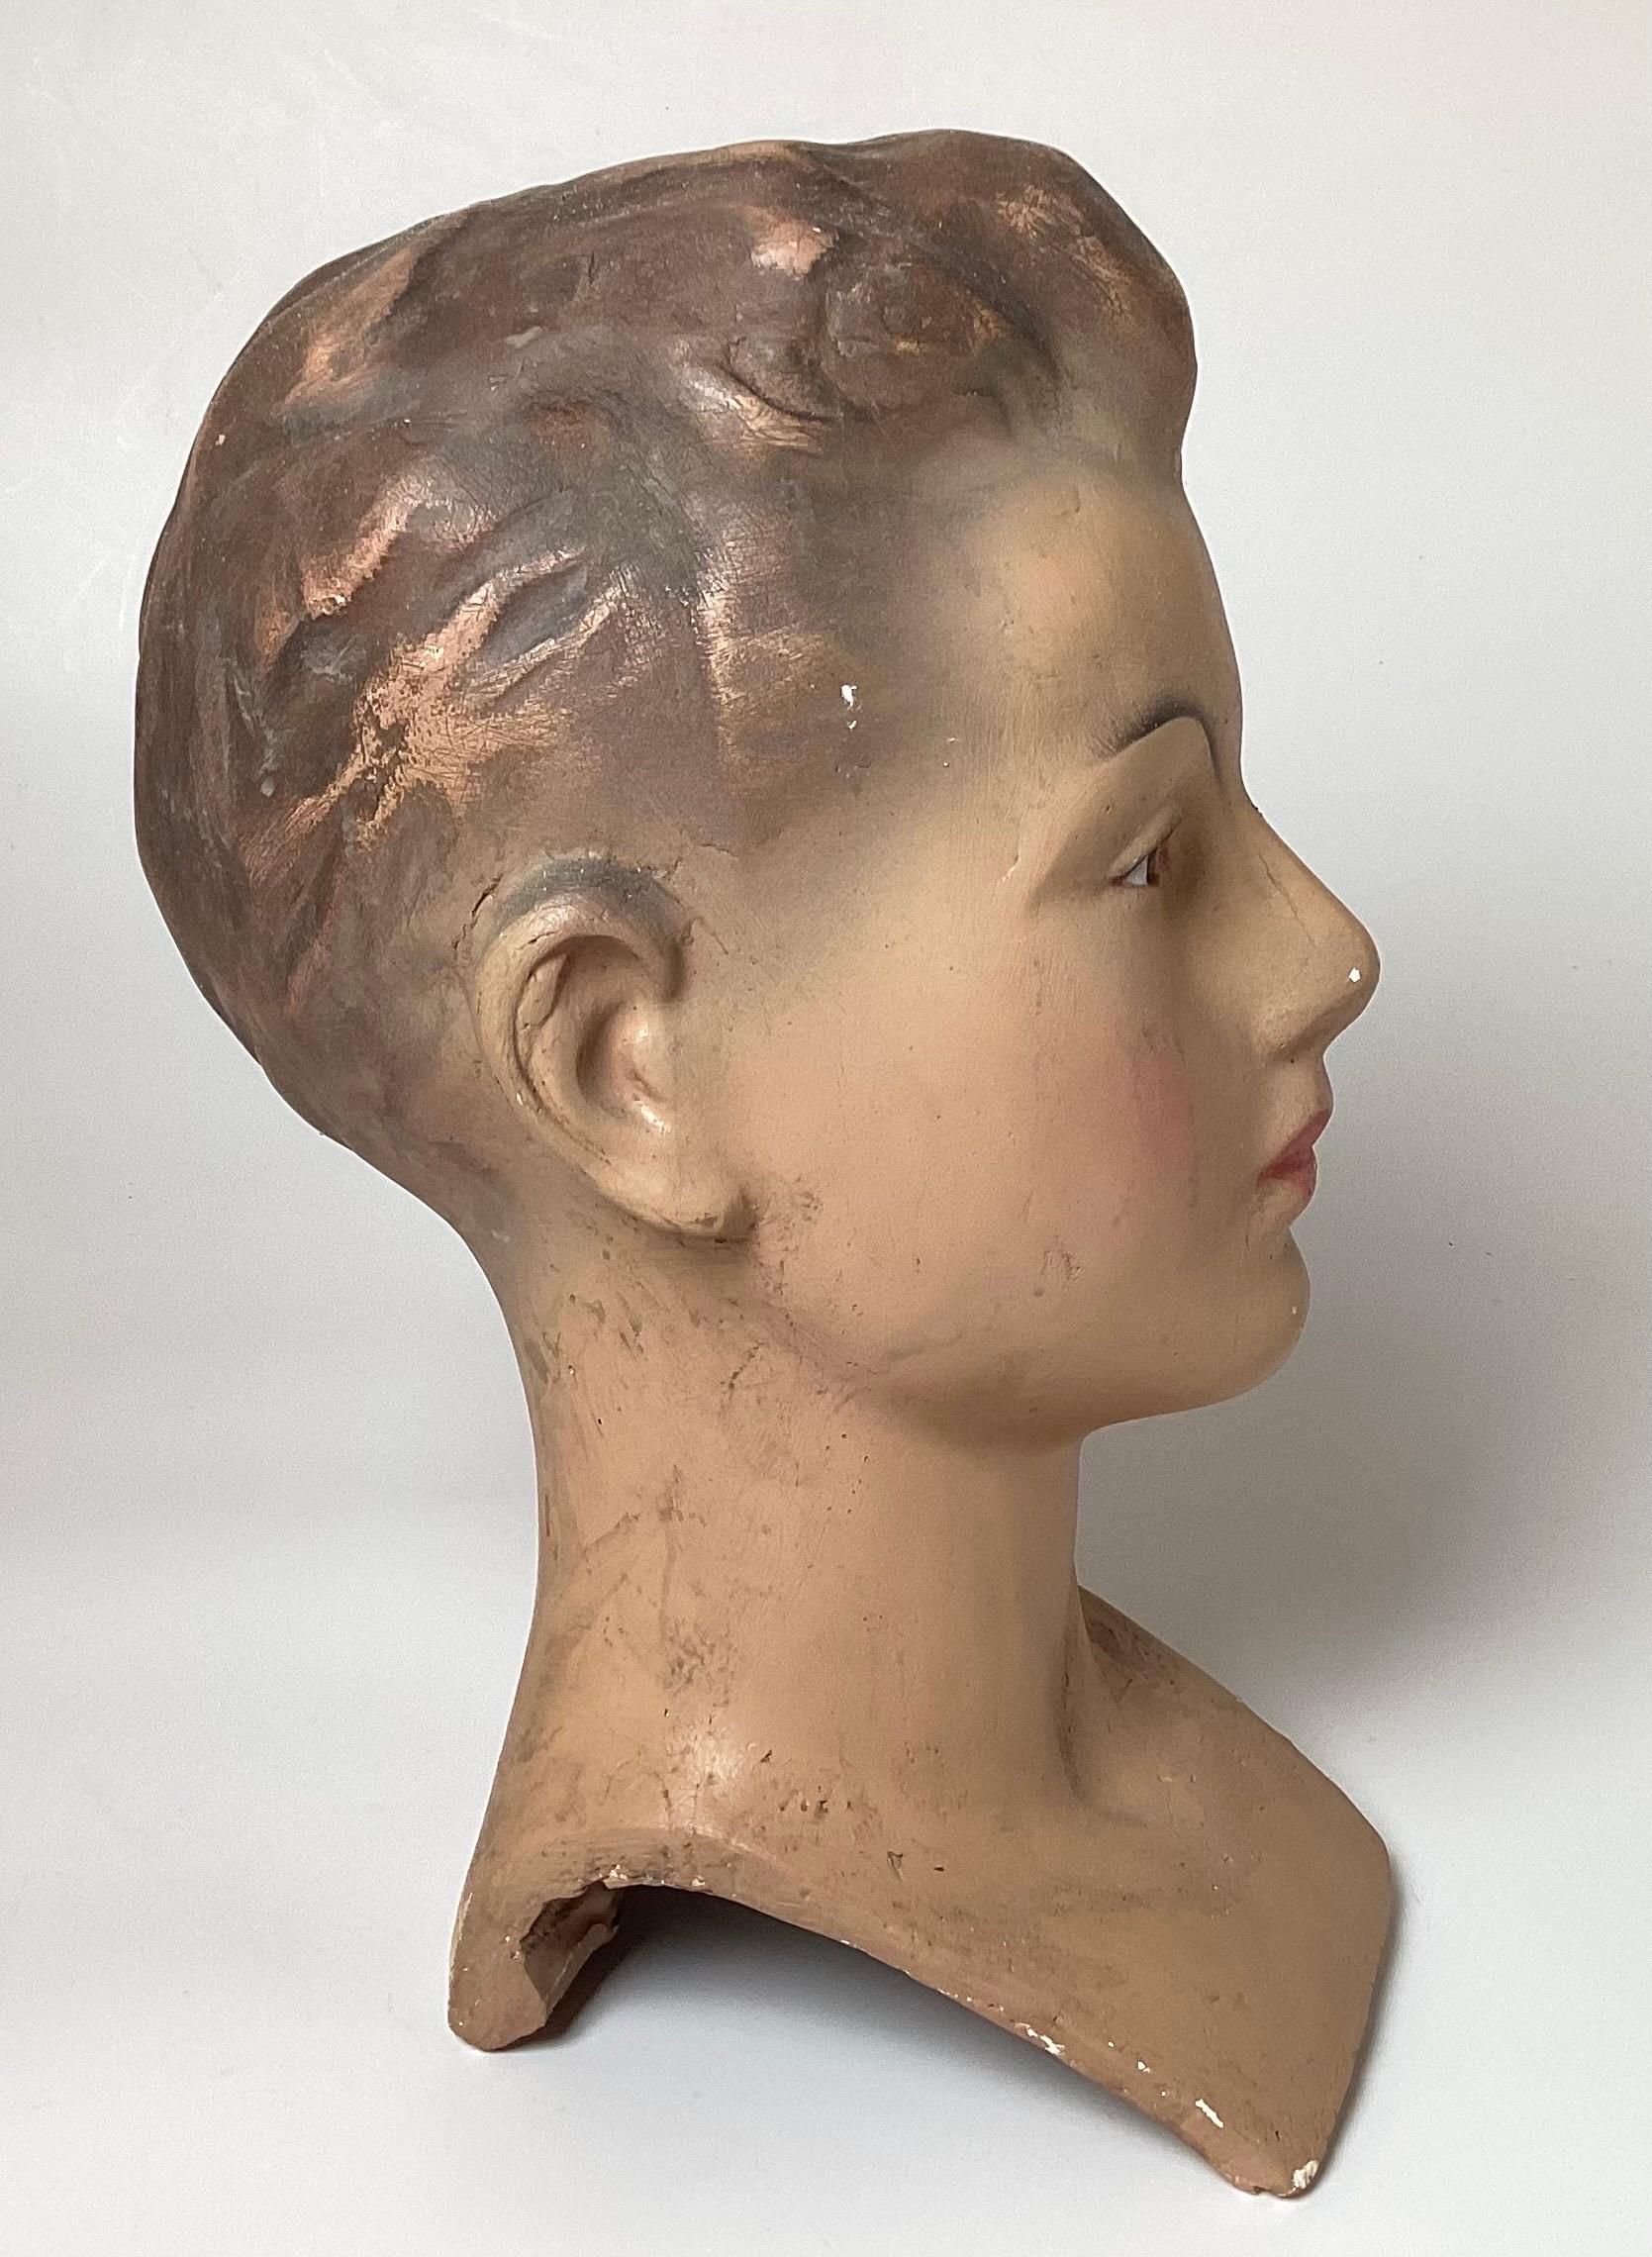 Mid-20th Century European Young Male Mannequin Head, 1940s